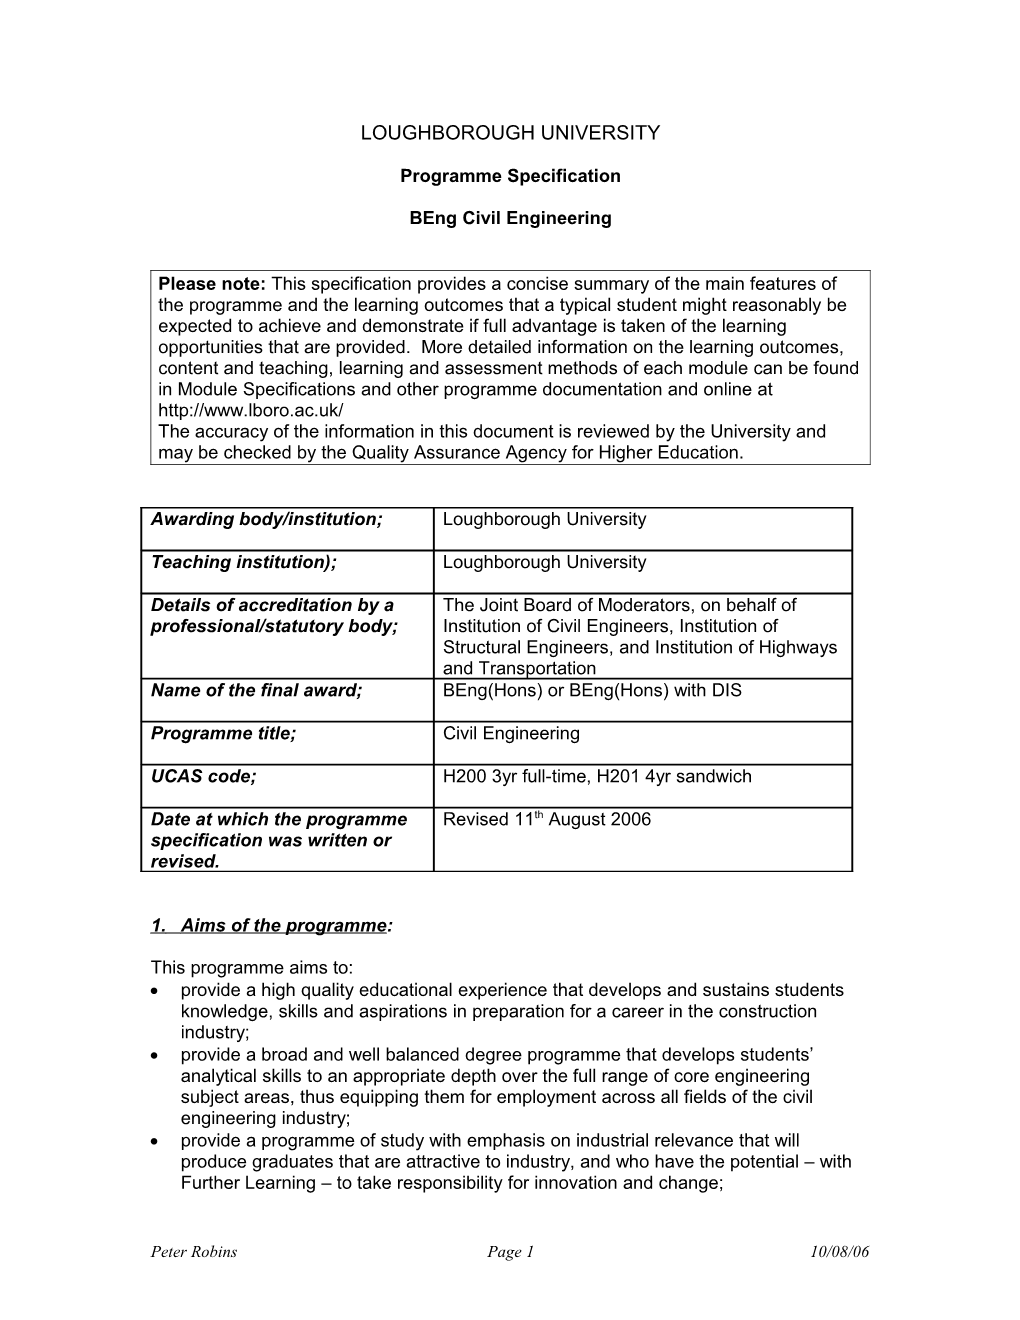 DRAFT PROGRAMME SPECIFICATION B Eng H200